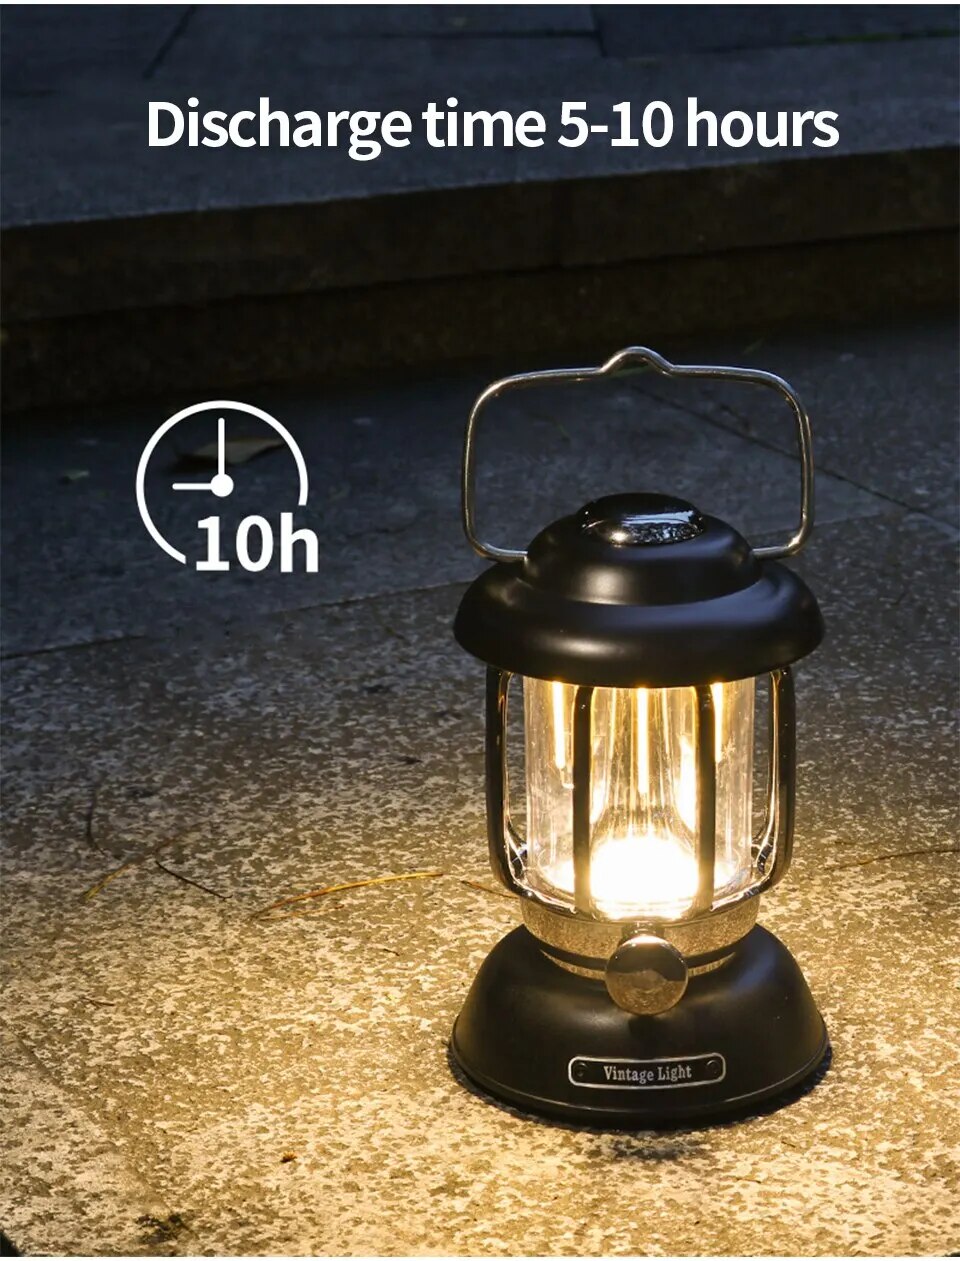 come4buy.com-Autdoor Camping Lantern Portable USB Rechargeable Lamp